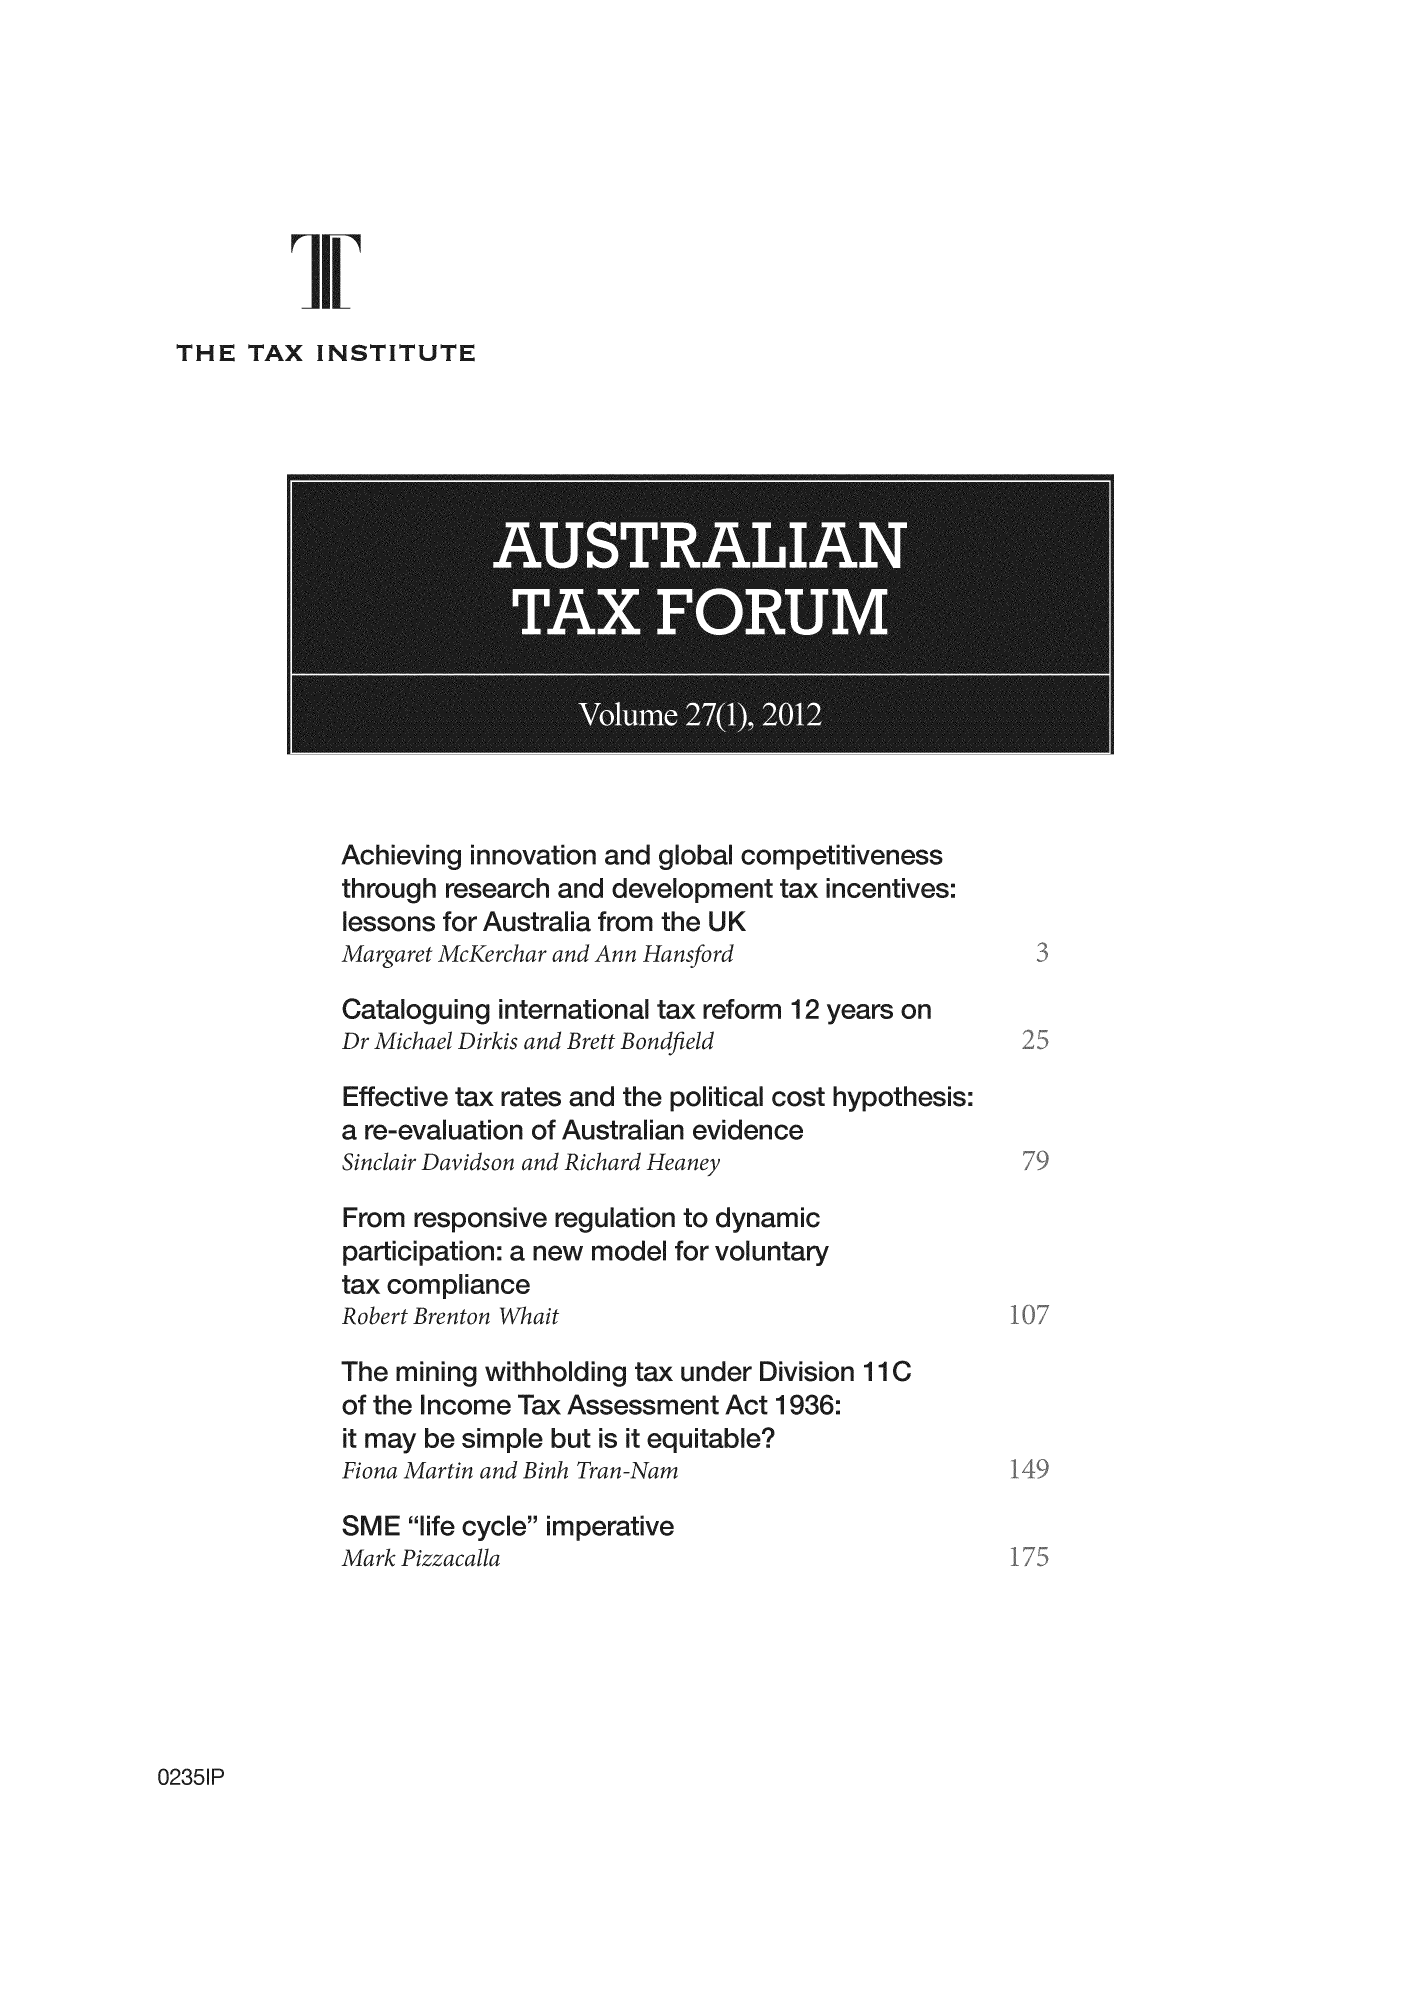 handle is hein.journals/austraxrum27 and id is 1 raw text is: INSTITUTE

AUSTALIAN
TAXOU

ileving innovation and g
>ugh research and deve
0ons for Australia from t

>guing inter

Effective tc
a re-evalus
Sinclair Davi,
From resp
participati

Brett B(

obal competitiveness
opment tax incentives
he UK
Ssford
ix reform 12 years on

tes and the po itica cost hypothes
of Australian evidence

ve regula
new mo

x comp iance
bert Brenton Whait
ie mining withhodi
the Income Tax As
may be simple but
ma Martin and Binh Tr

Ig
see

ation todynamic
de for voluntary

:ax under Divisia
sment Act 193E
equitab e?

114

E life cycle imerative

Ii

THI

et

ta
Ro,


